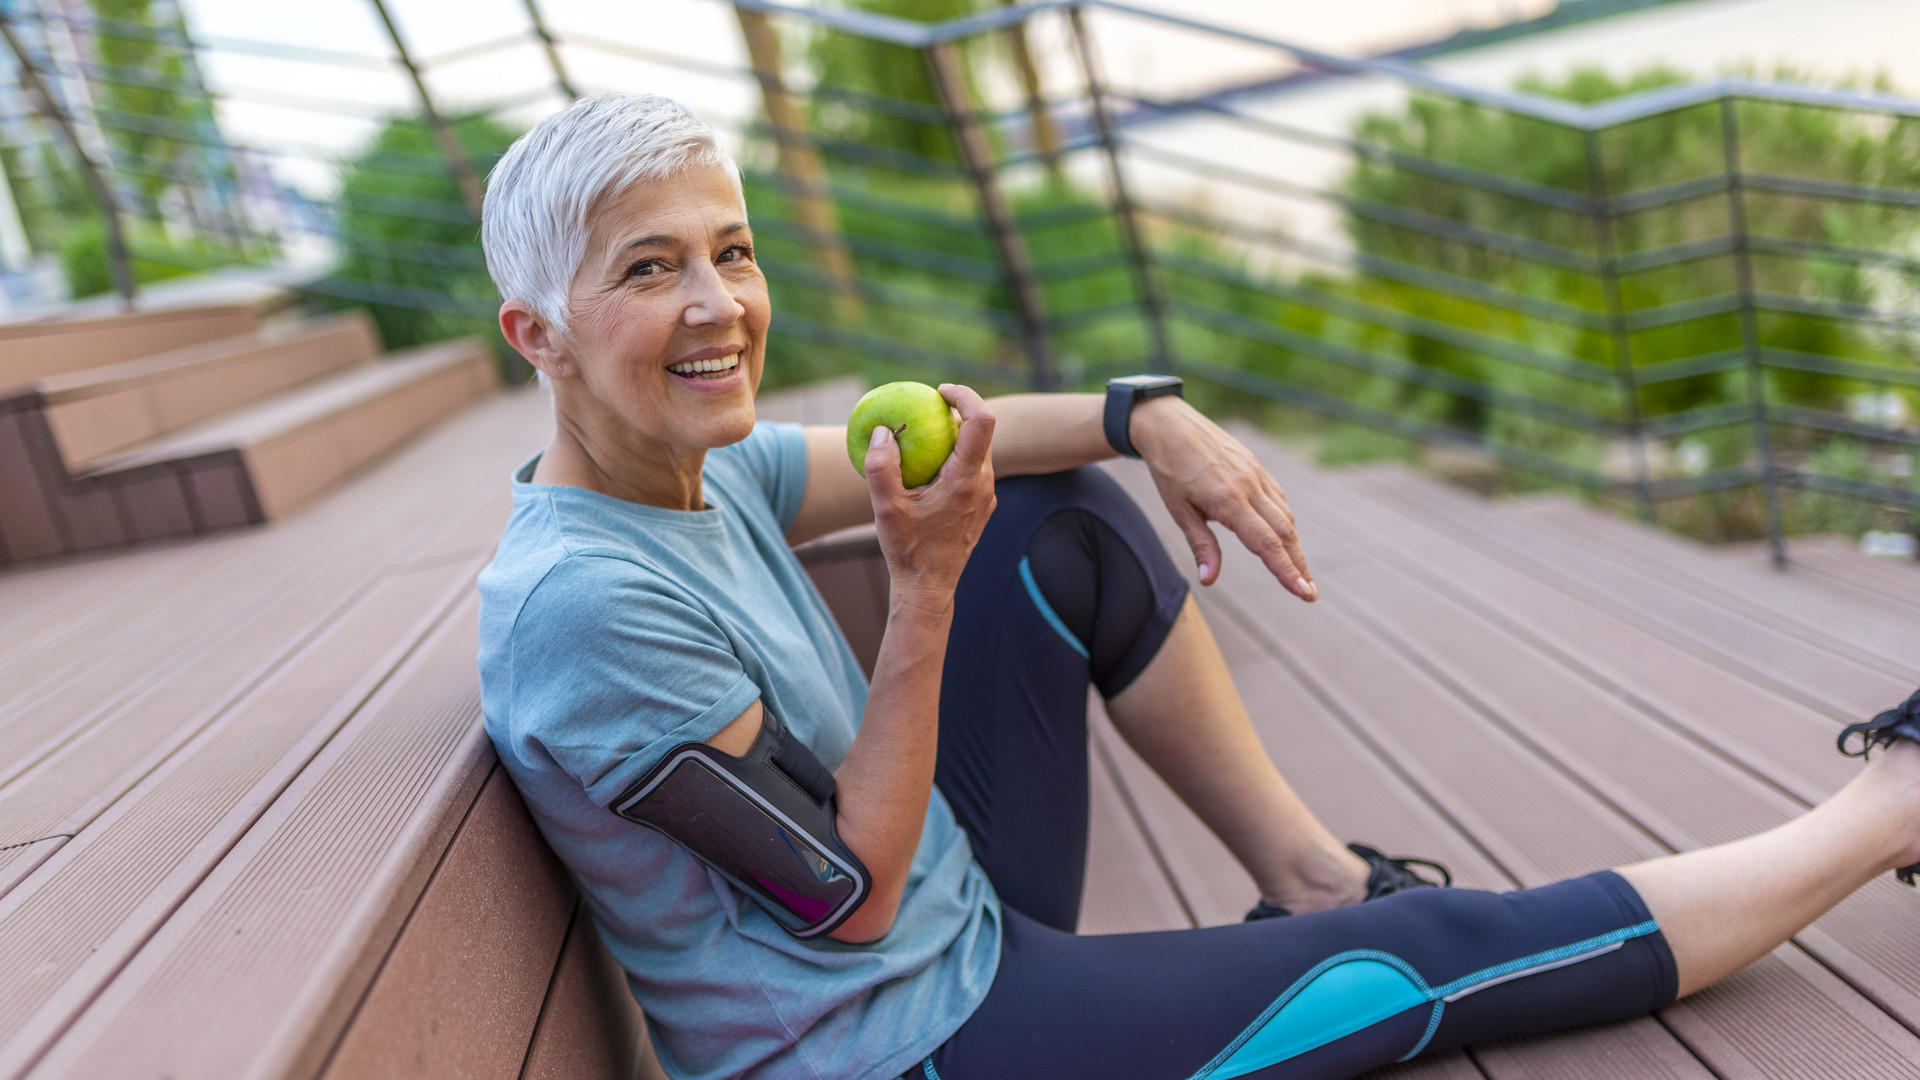 Mature athletic woman eating an apple after sports training